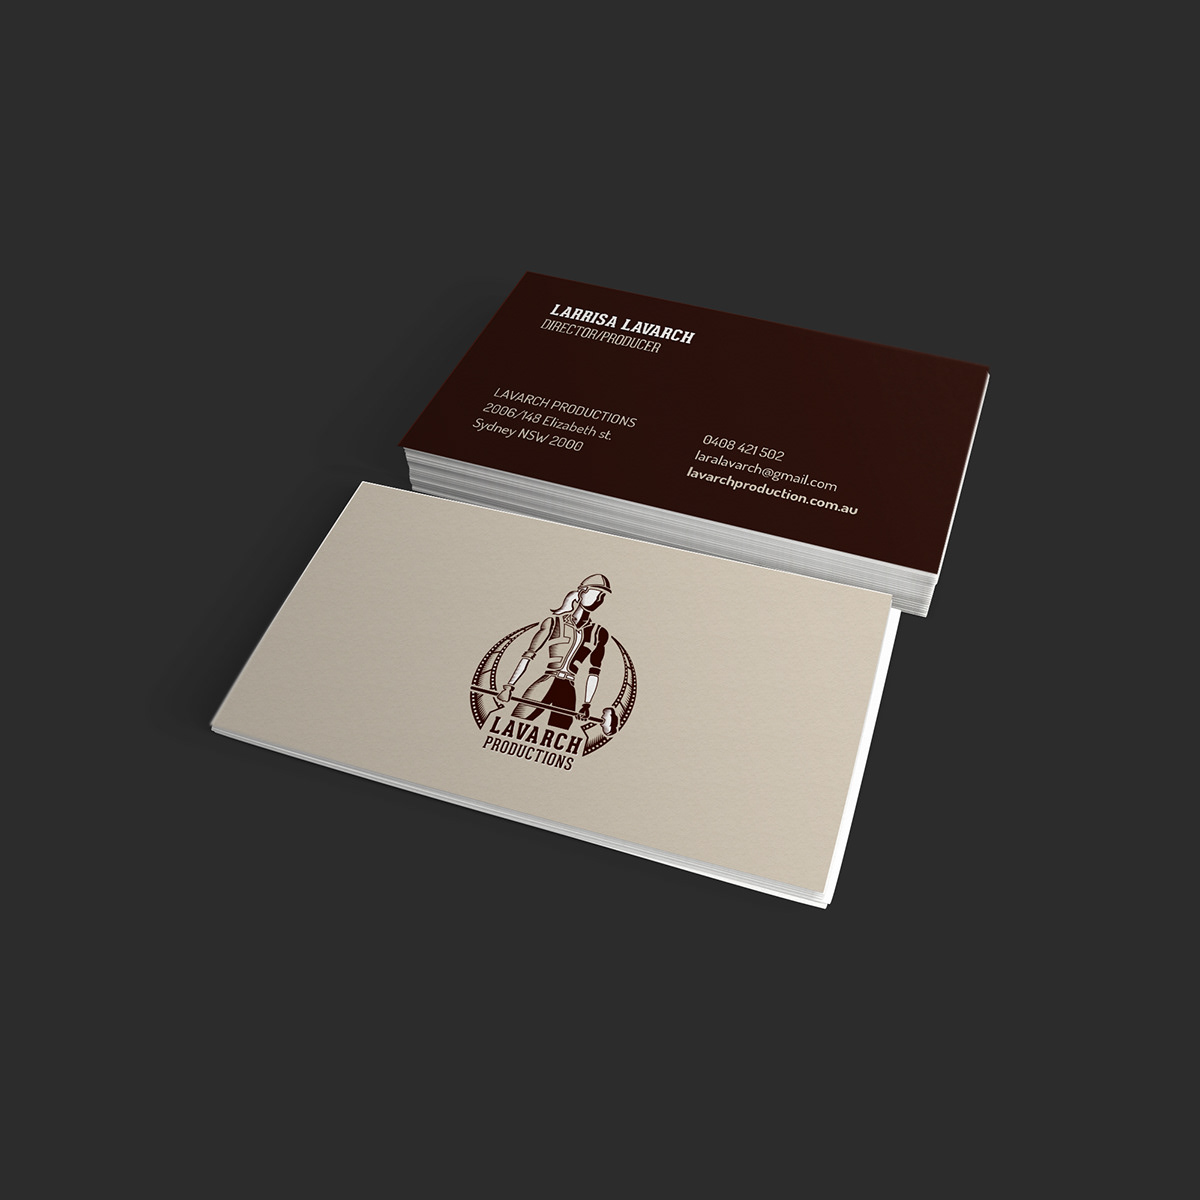 Lavarch Production clapboard identity logo owl hard-hitting contentious Sledgehammer provoking business card Stationery pattern Icon business